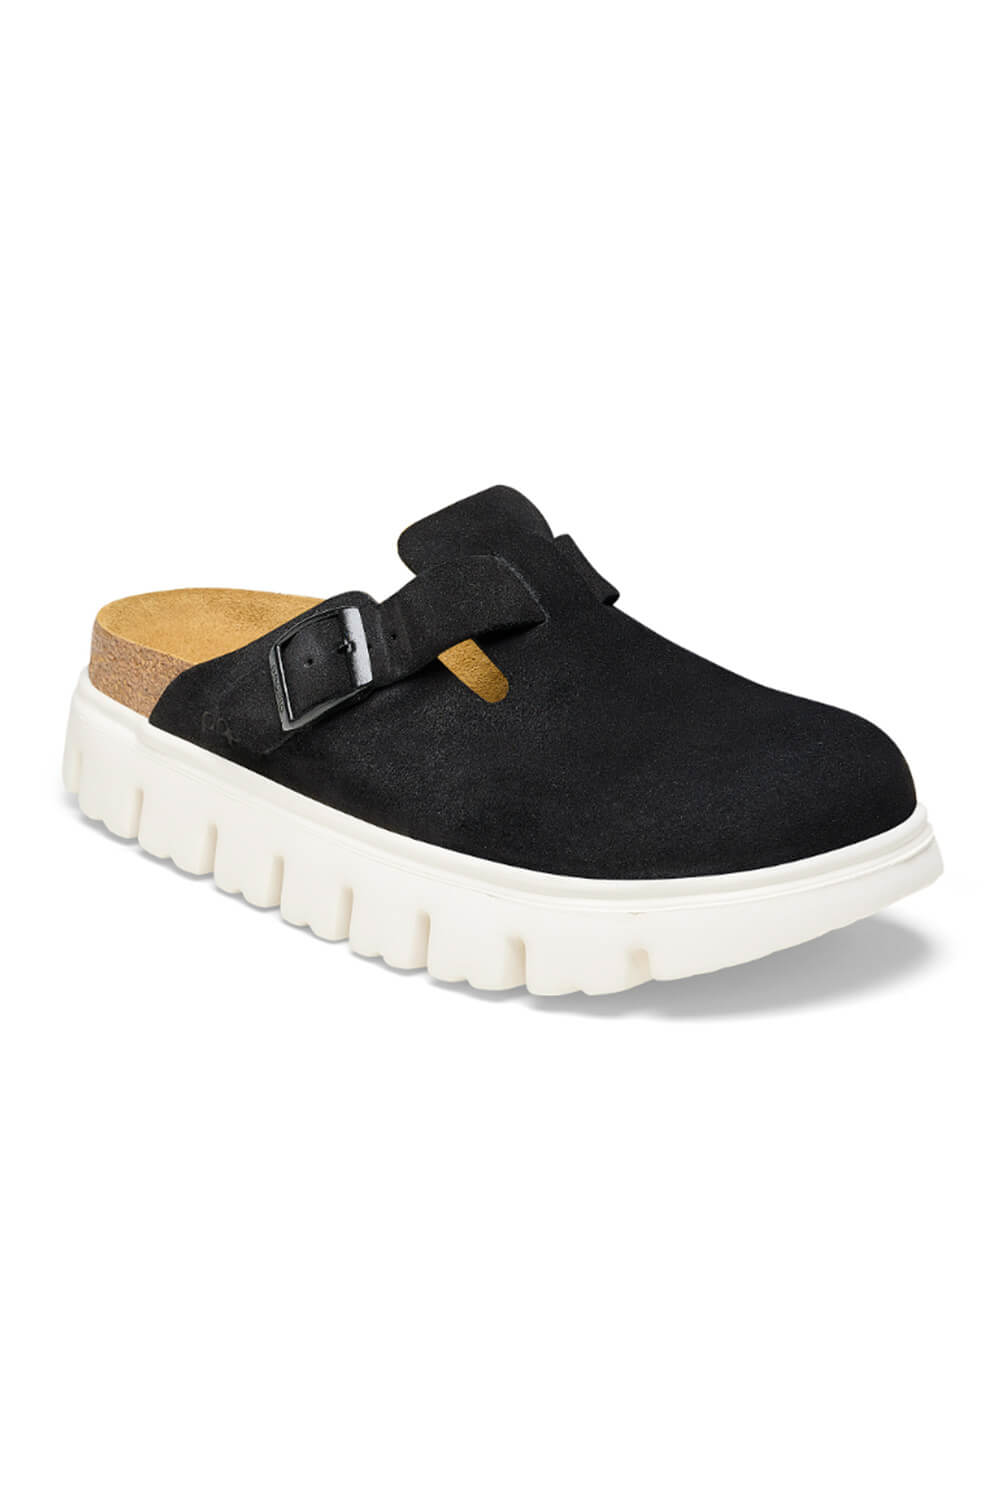 historie Vred opstrøms Papillio by Birkenstock Boston Chunky Suede Leather Clogs for Women in –  Glik's